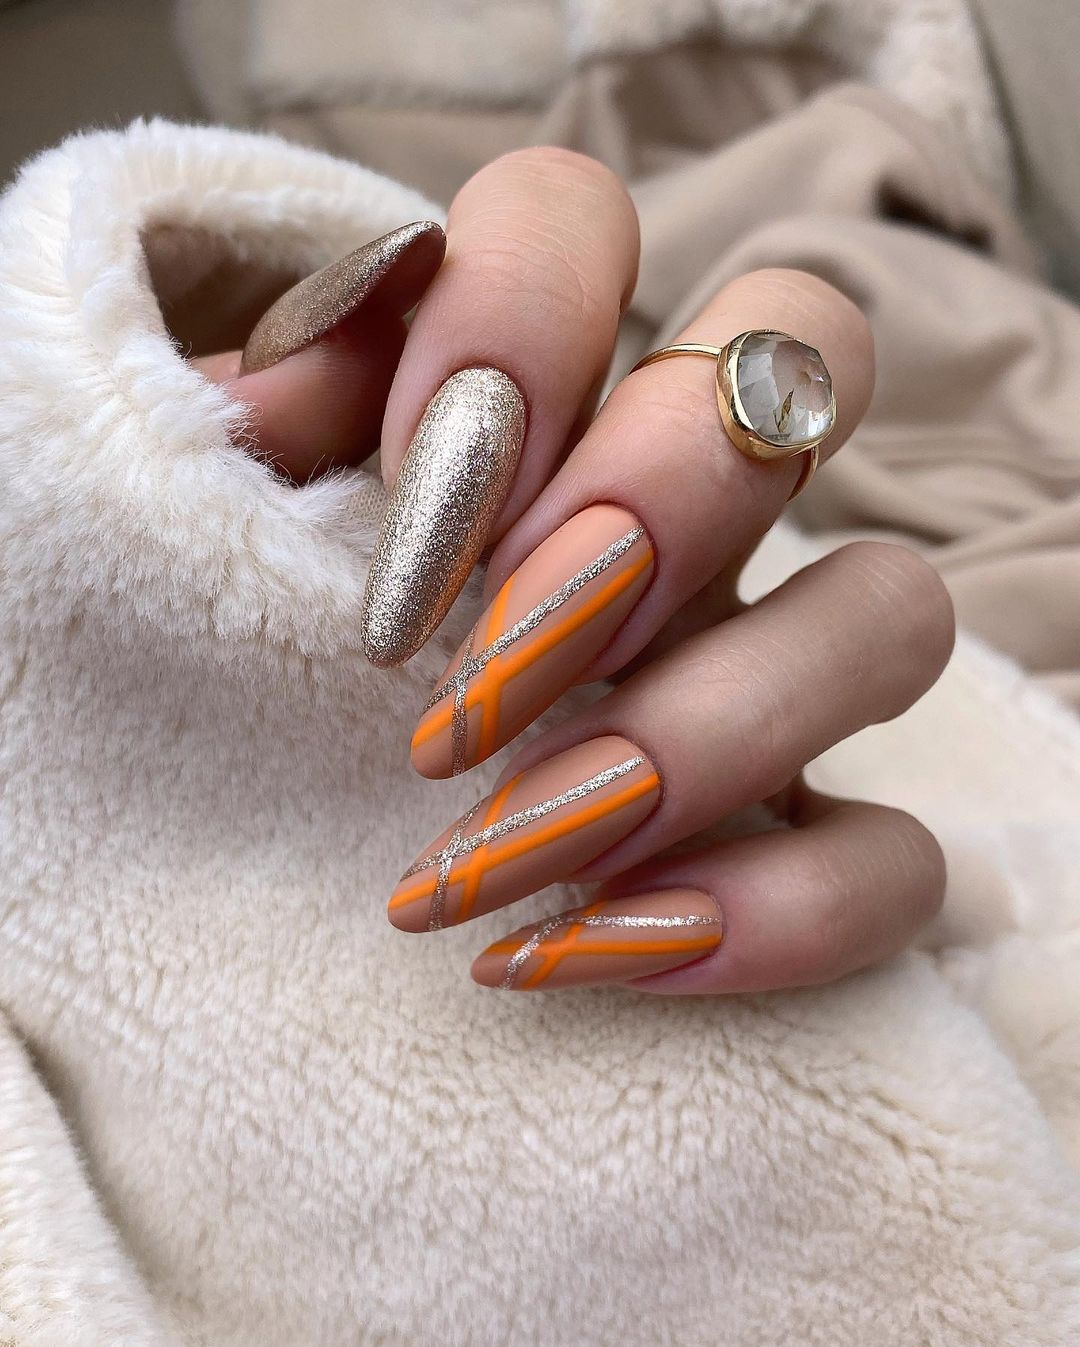 Long Almond Nails with Orange and Silver Lines